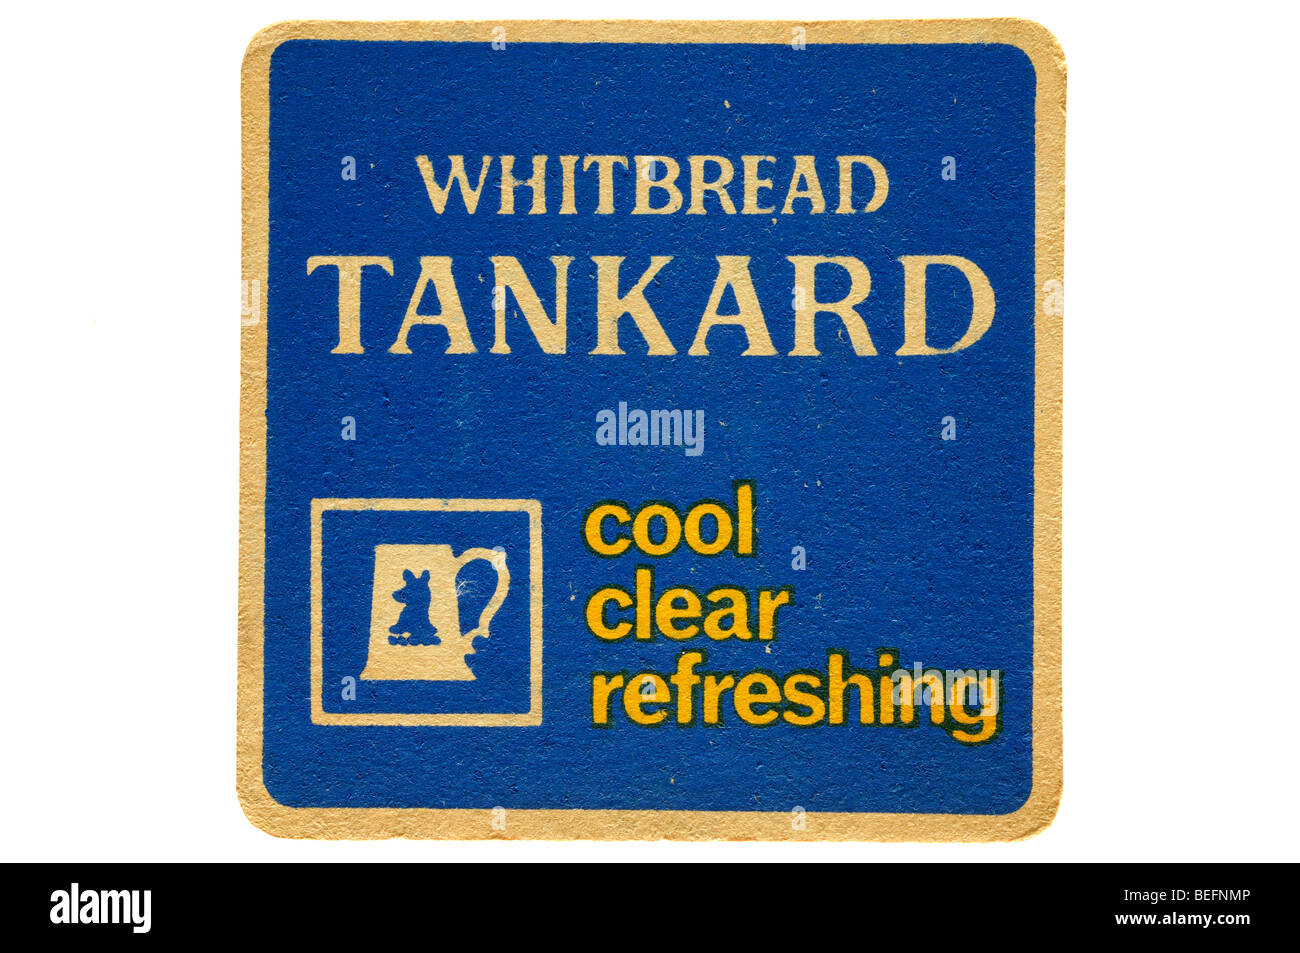 whitbread tankard cool clear refreshing Stock Photo - Alamy